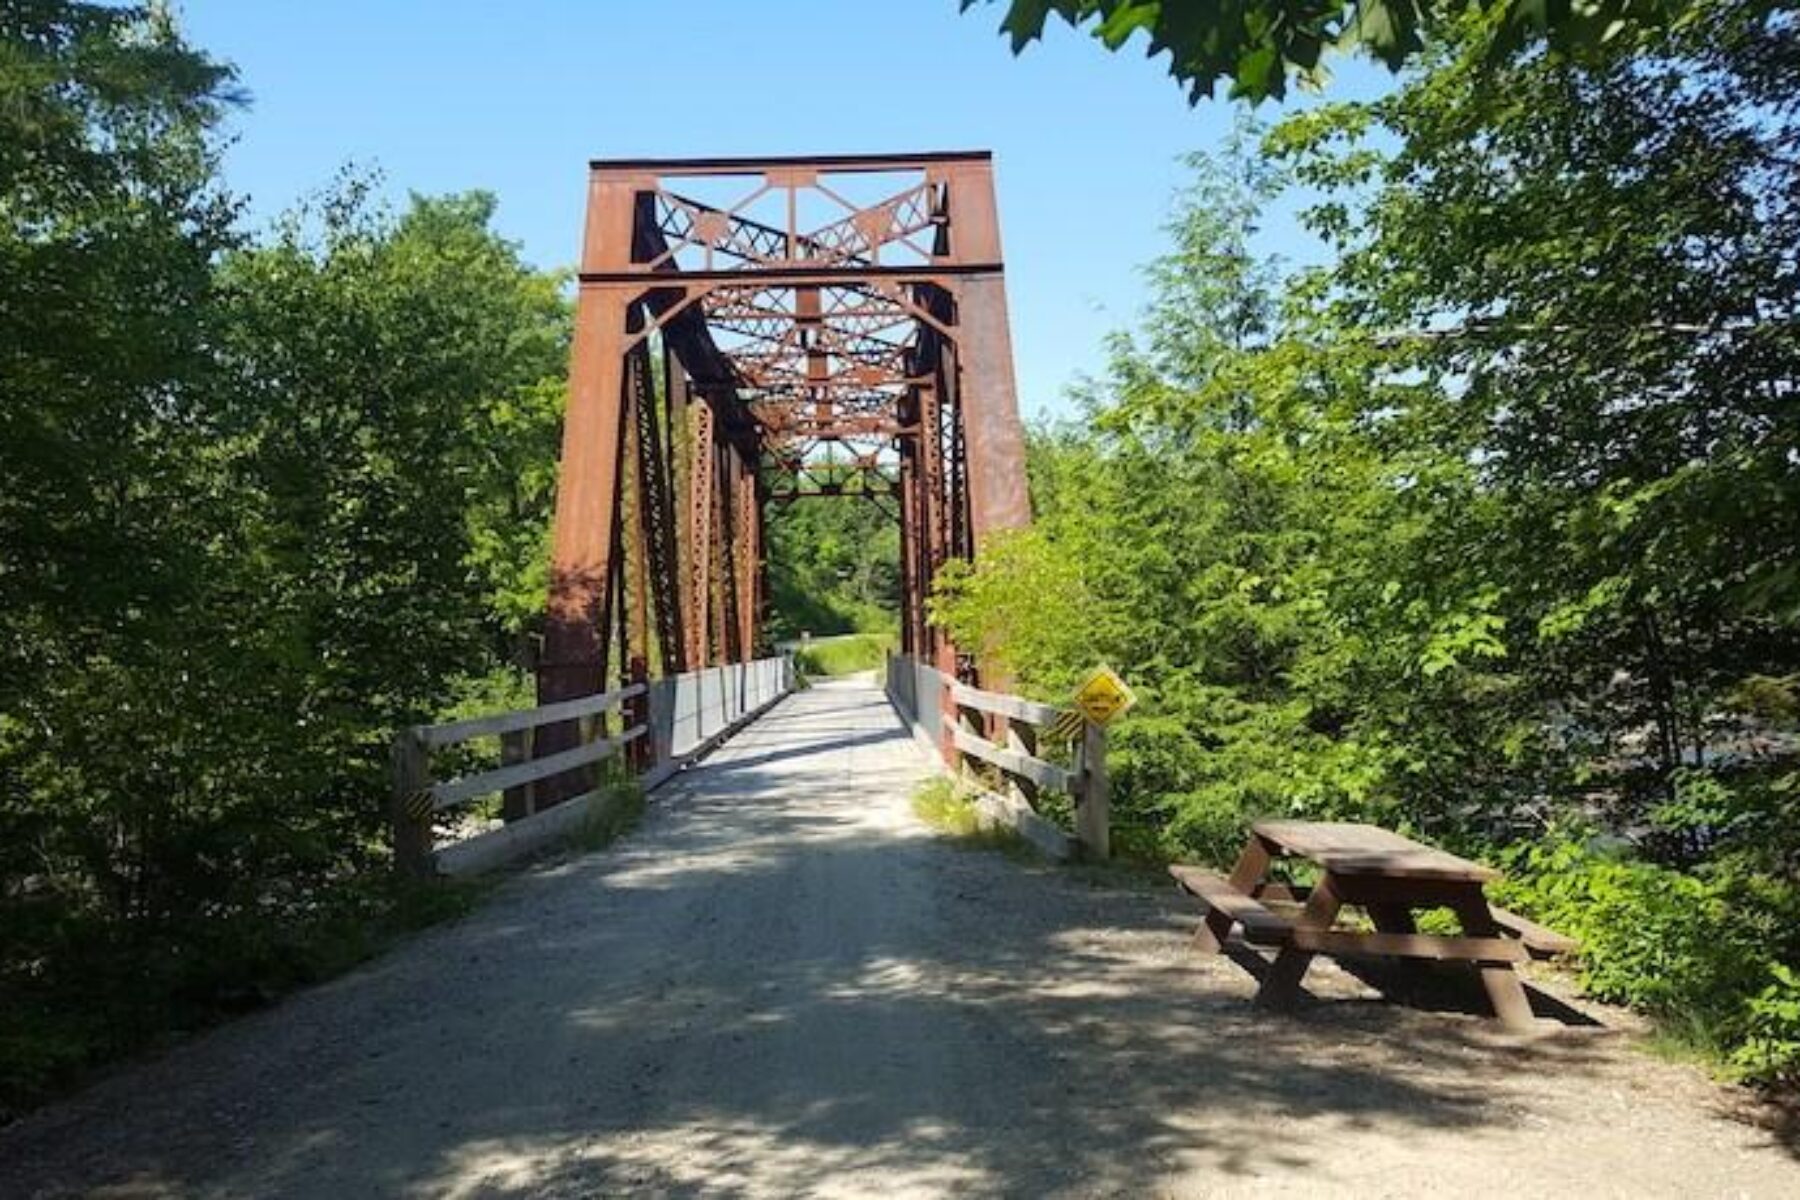 Maine's Down East Sunrise Trail | Photo courtesy Rails-to-Trails Conservancy